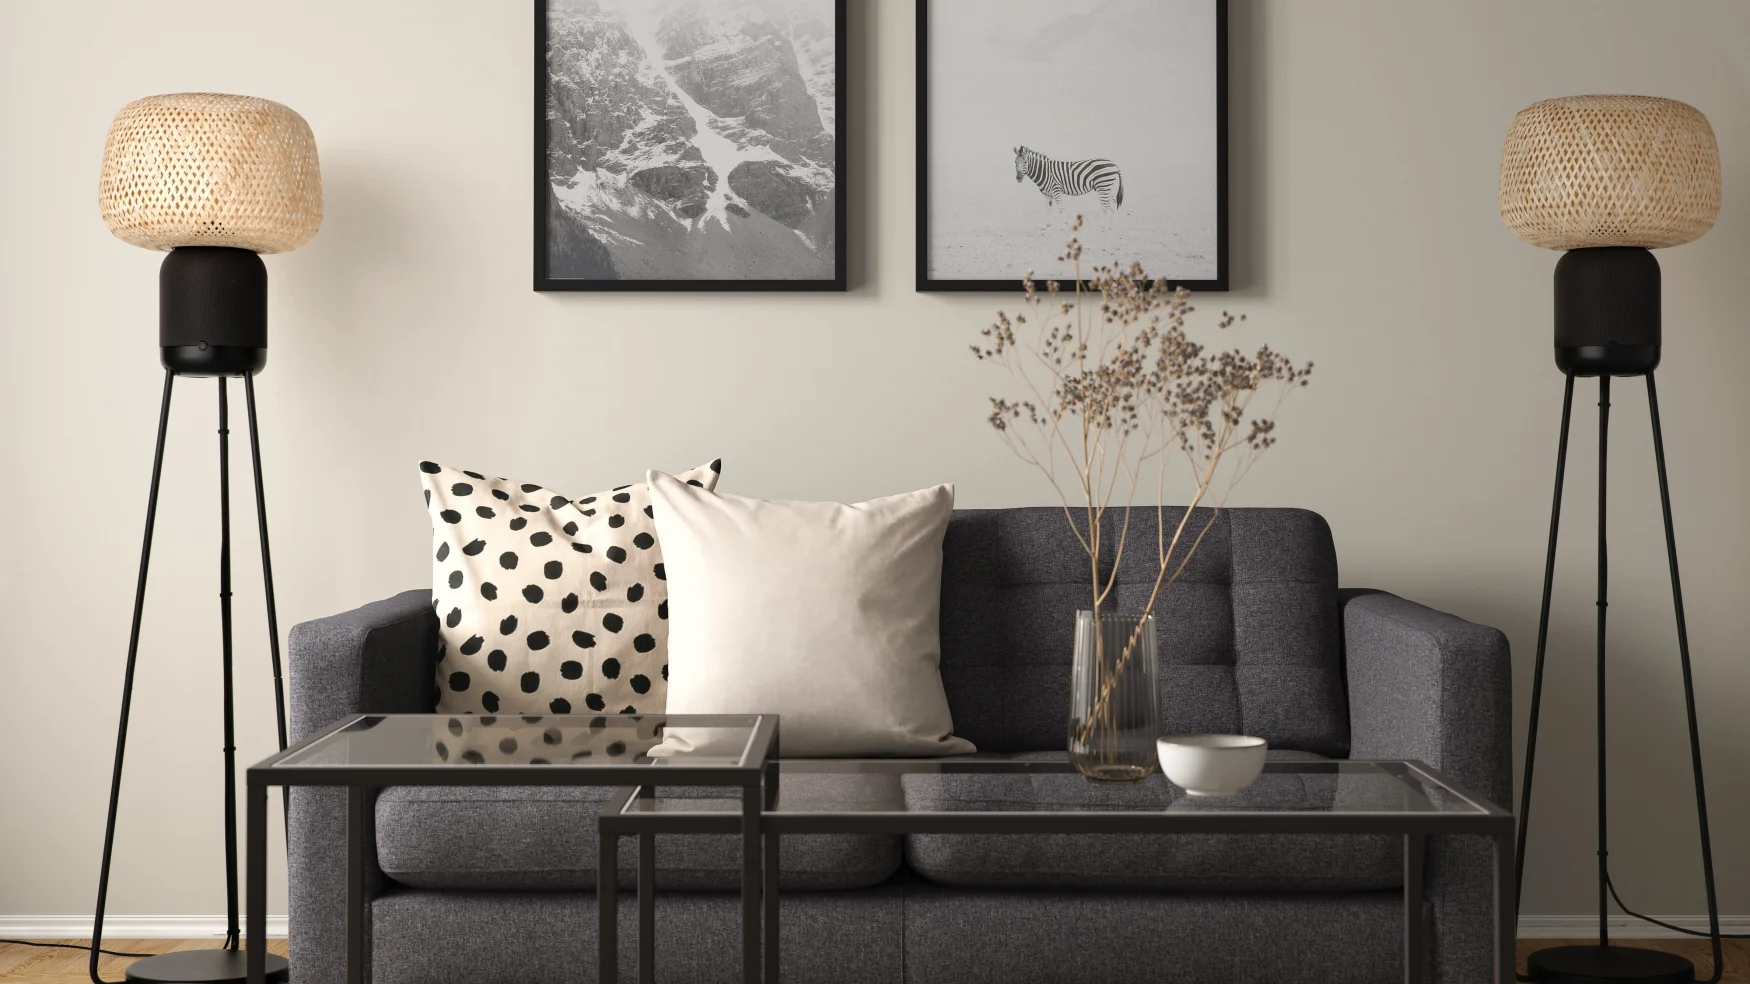 Two IKEA Symfonisk floor lamp speakers flanking a couch in a modern living room.